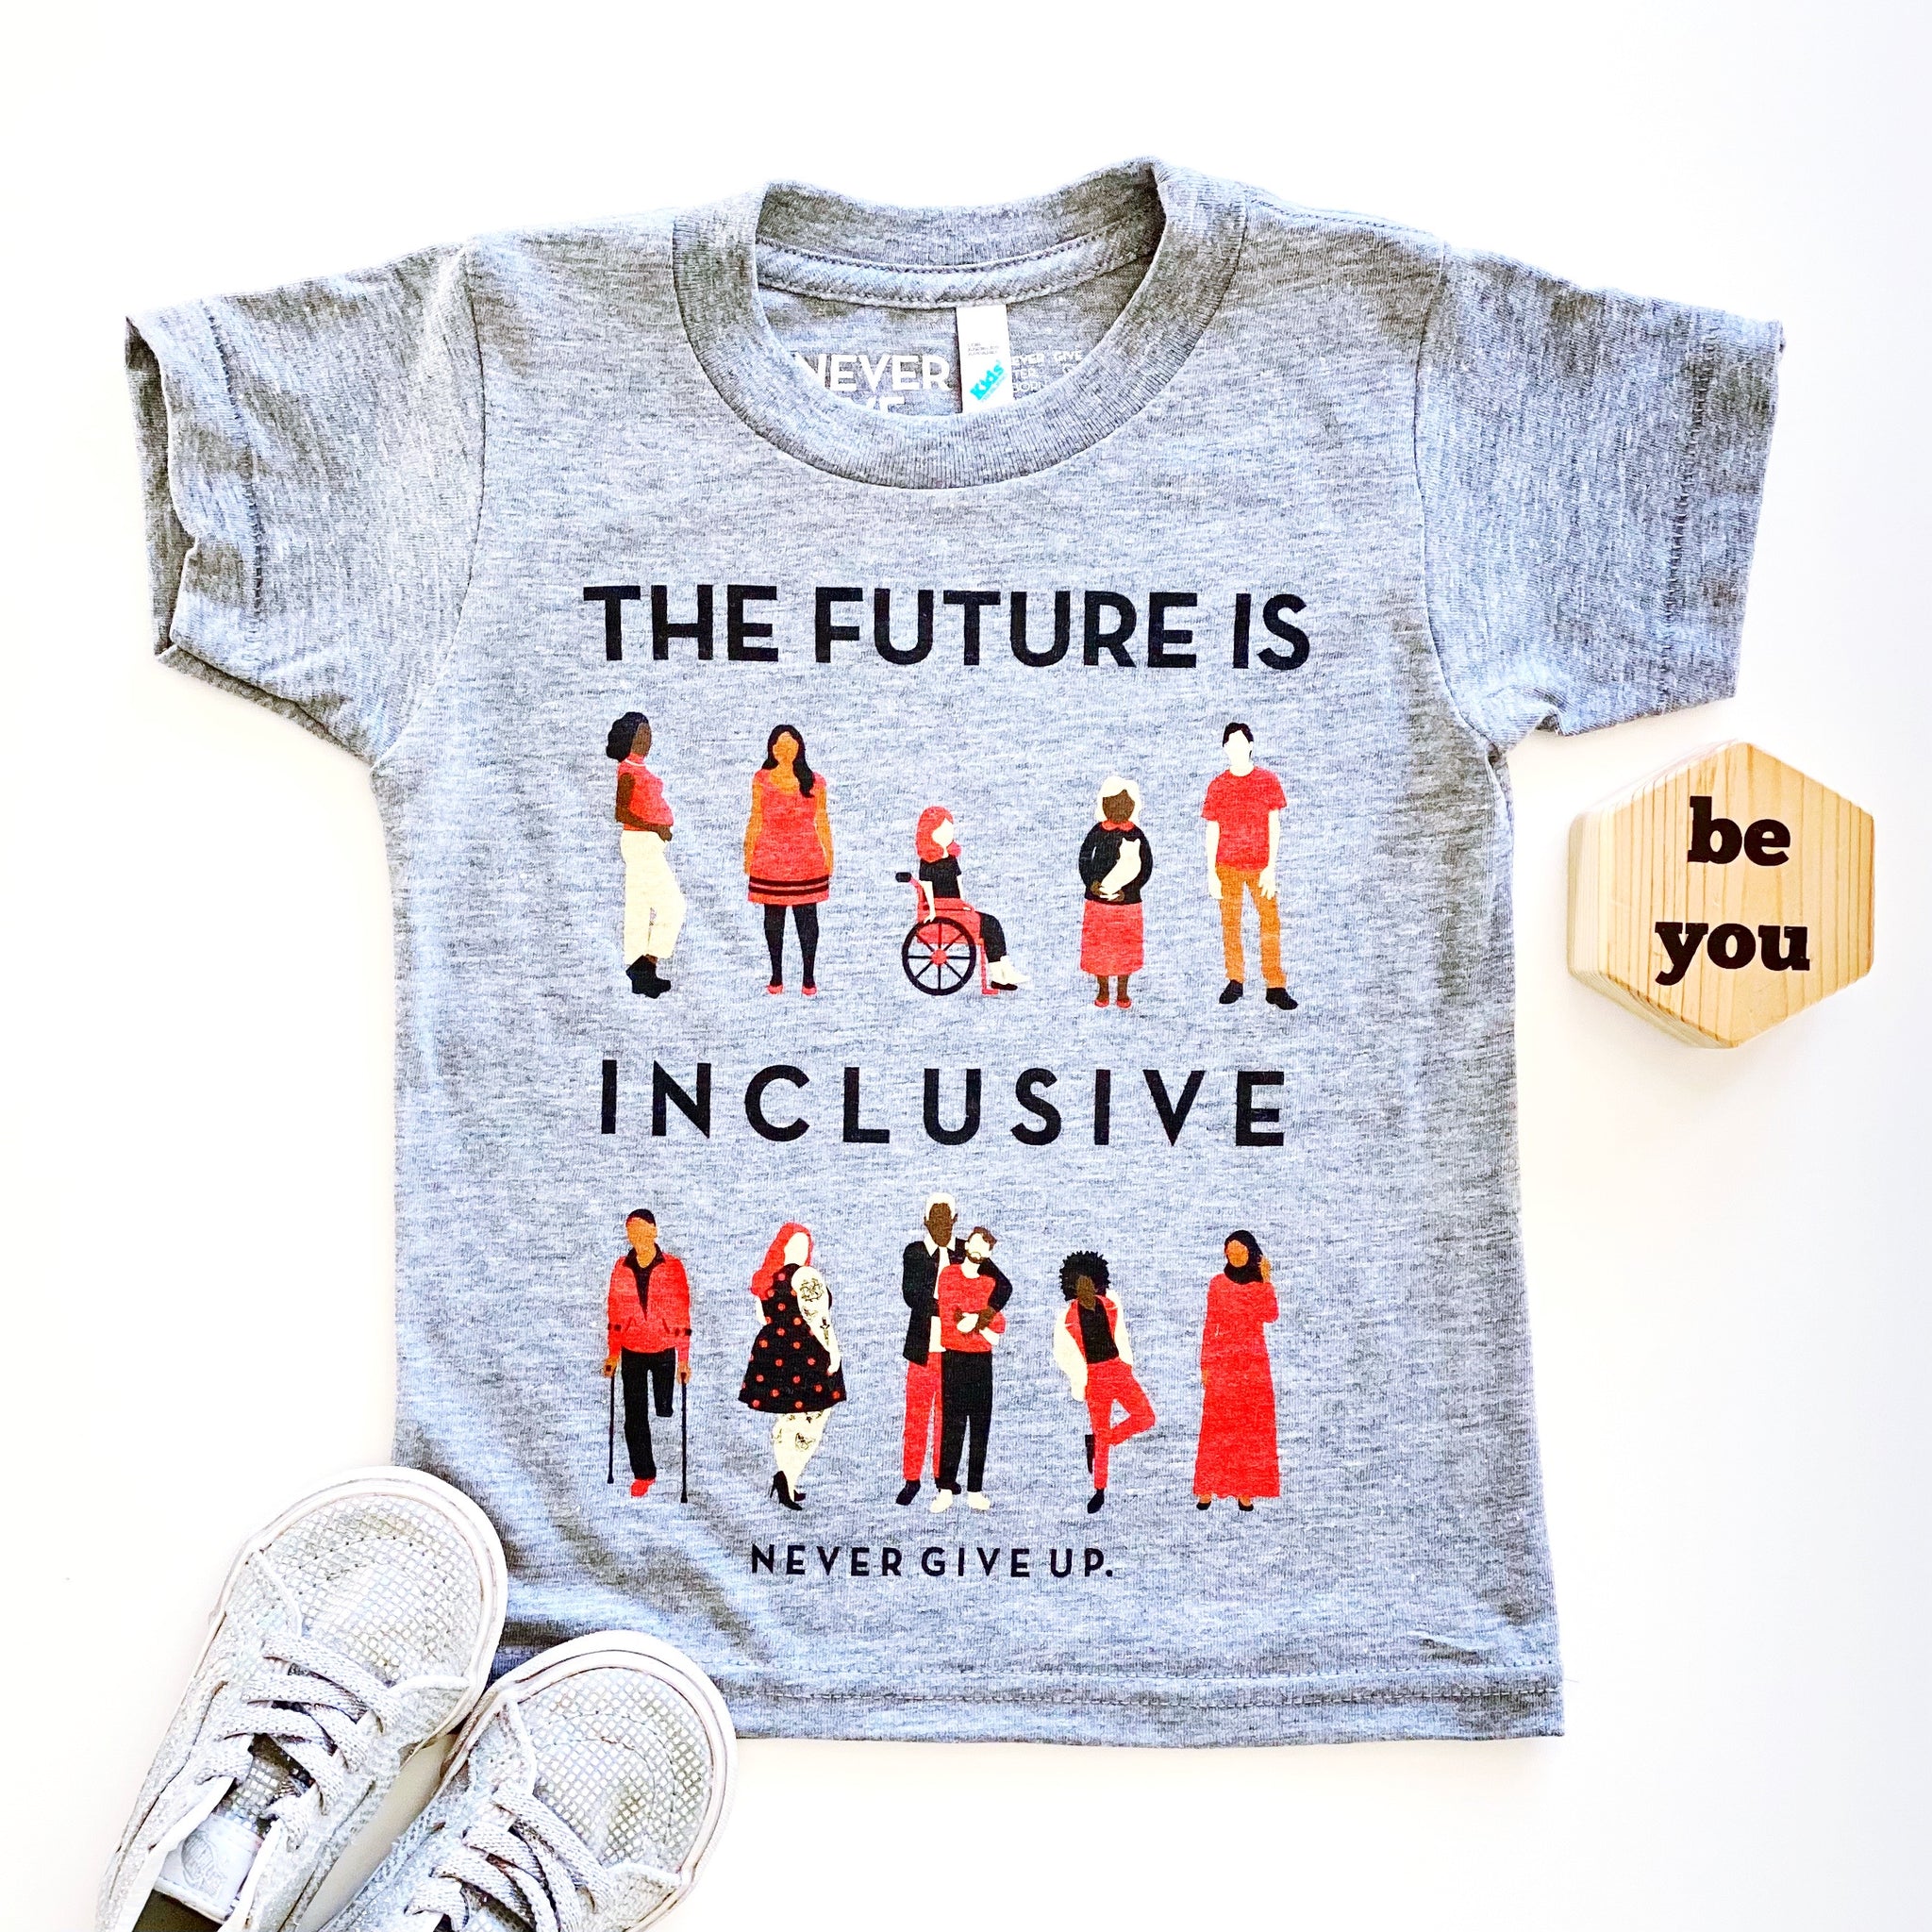 THE FUTURE IS INCLUSIVE - NEVER GIVE UP. SHOP